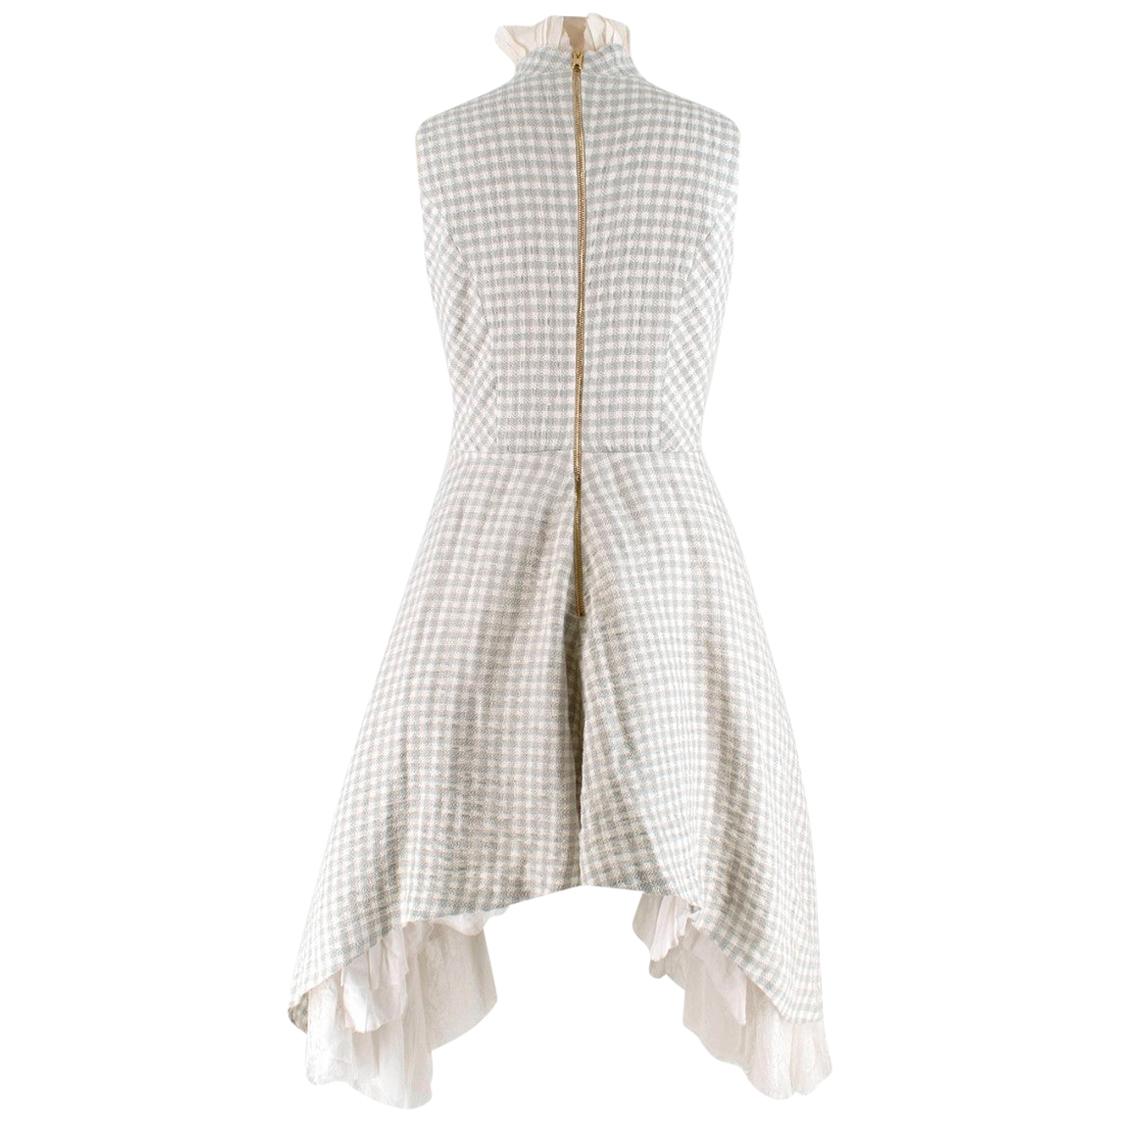 Natasha Zinko Grey Checked Sleeveless Dress
- Grey and white checked woven pattern
- Pearlescent buttons down the front 
- White ruffled trimming with exposed threading 
- Lined and netted skirt
- Ruffle front detail 
- High neck

Materials
100%